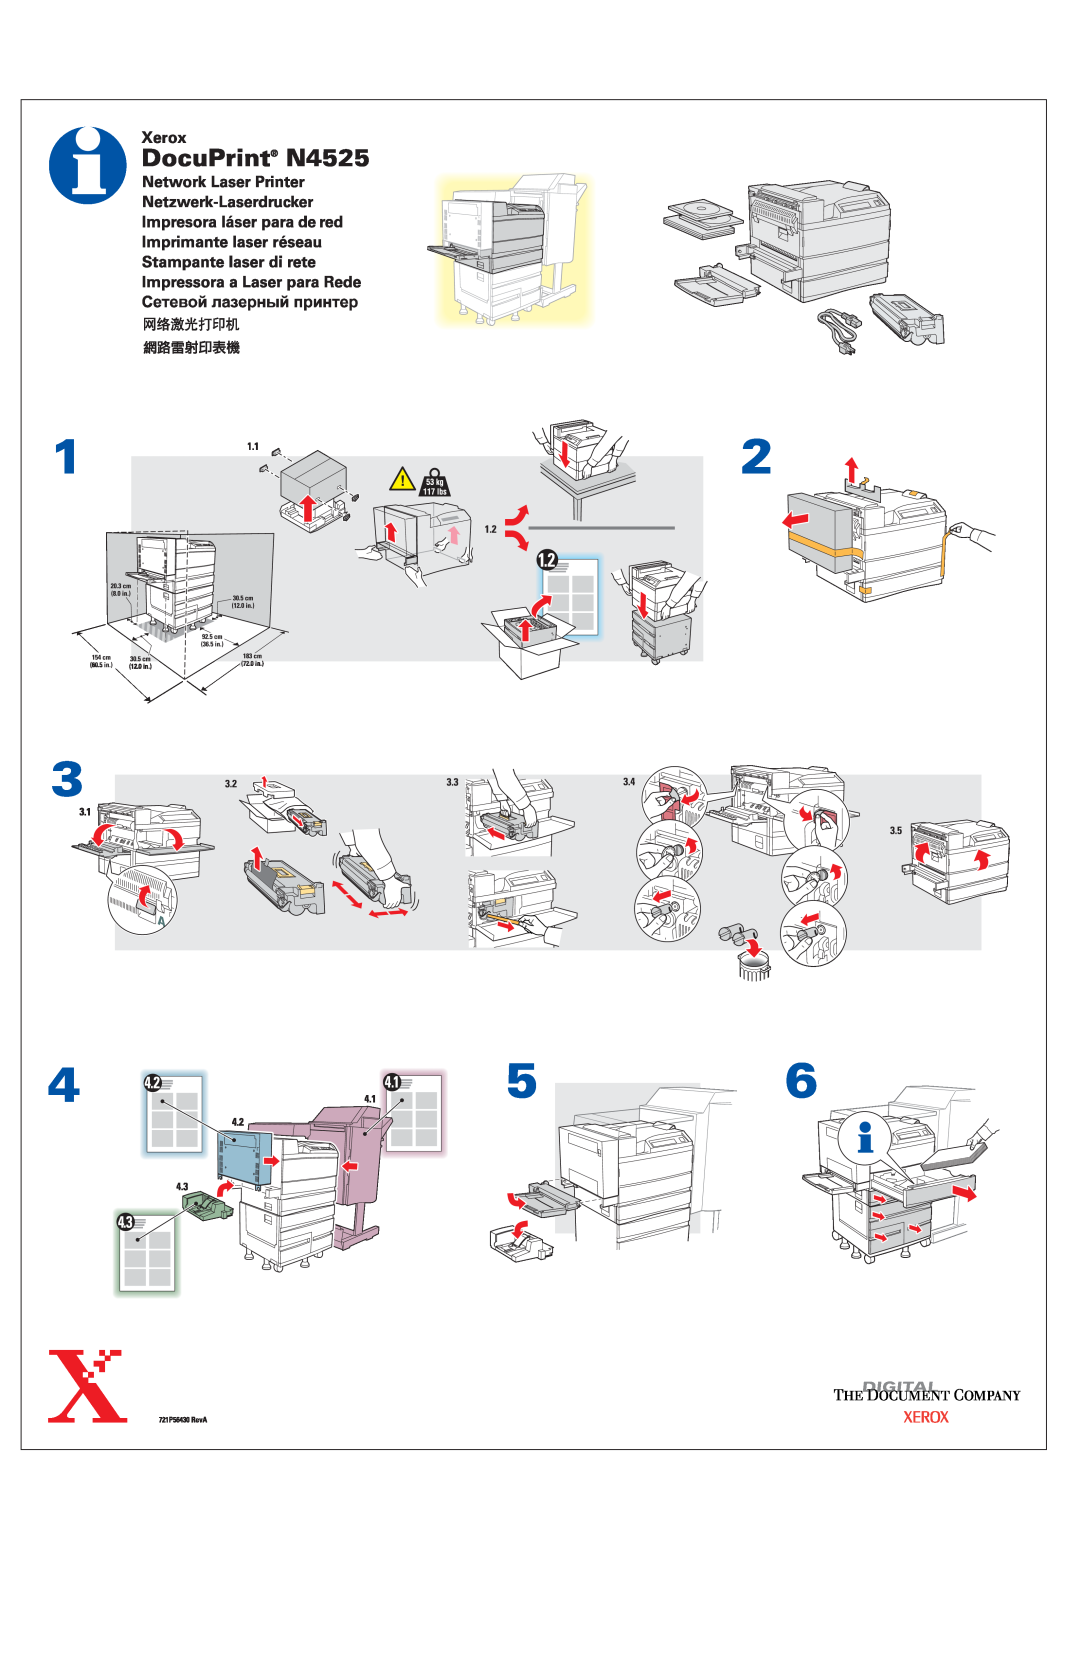 Xerox manual DOCUPRINT N4525, Advanced Features And Troubleshooting Manual, Xerox, Network Laser Printer 